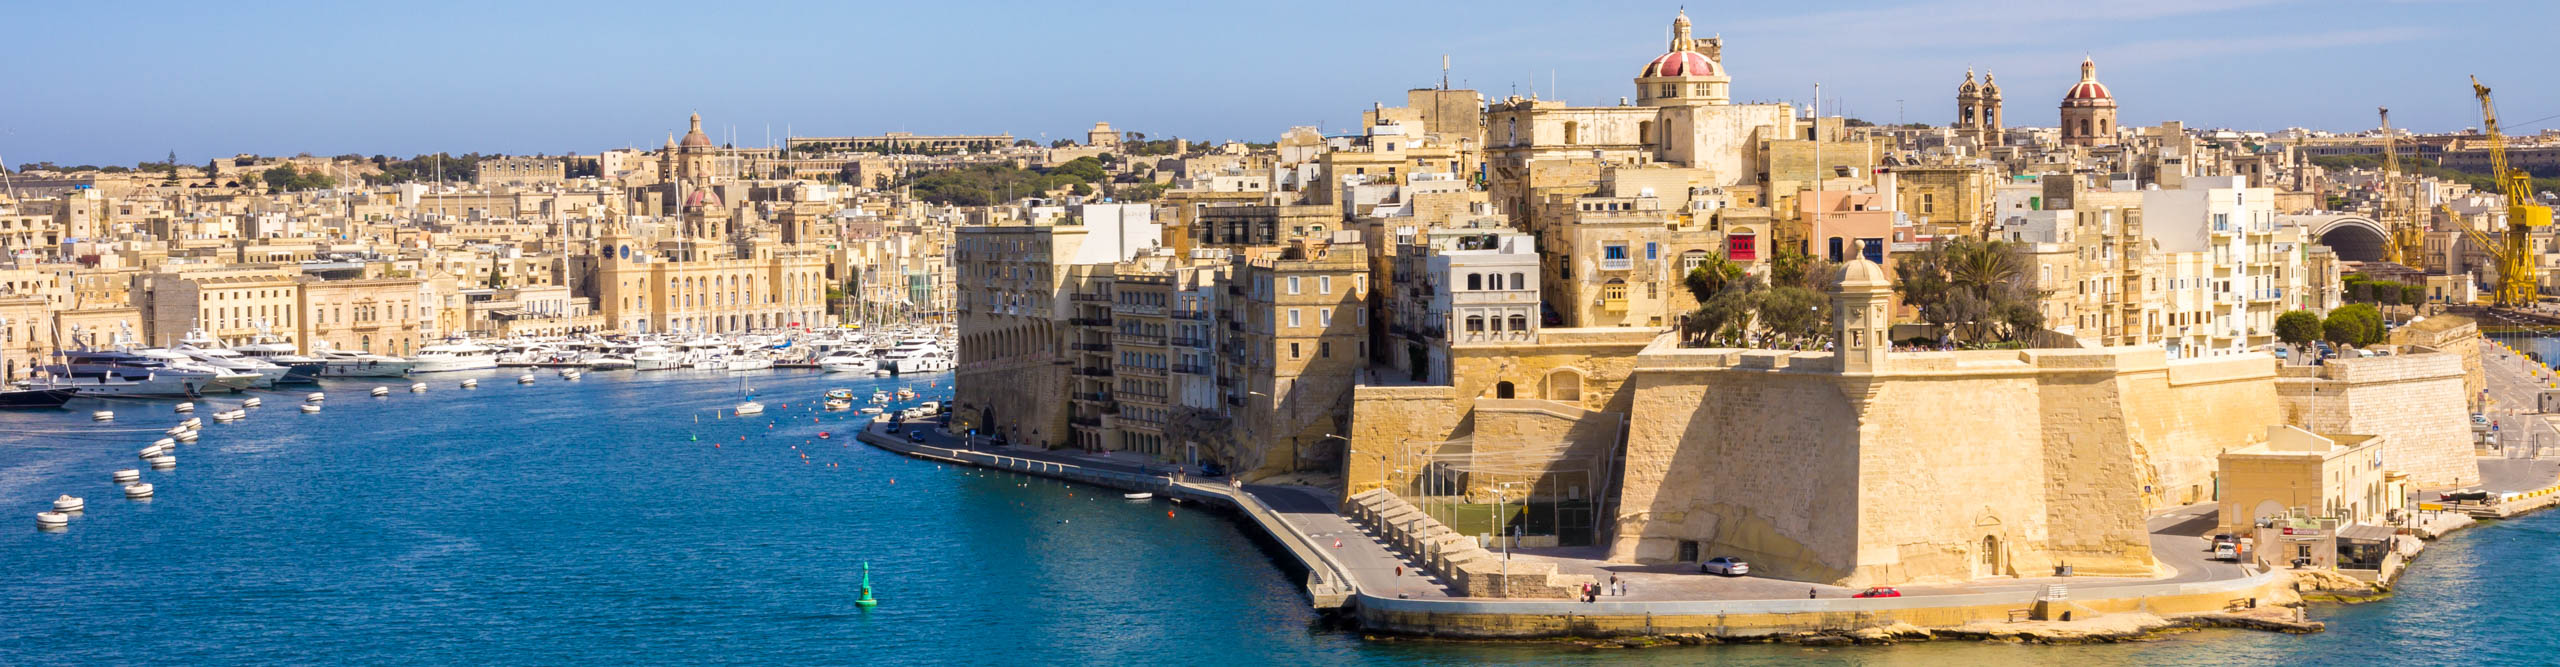 View of Paola City from Valletta Waterfront with boats in the harbour on a sunny day in Malta 